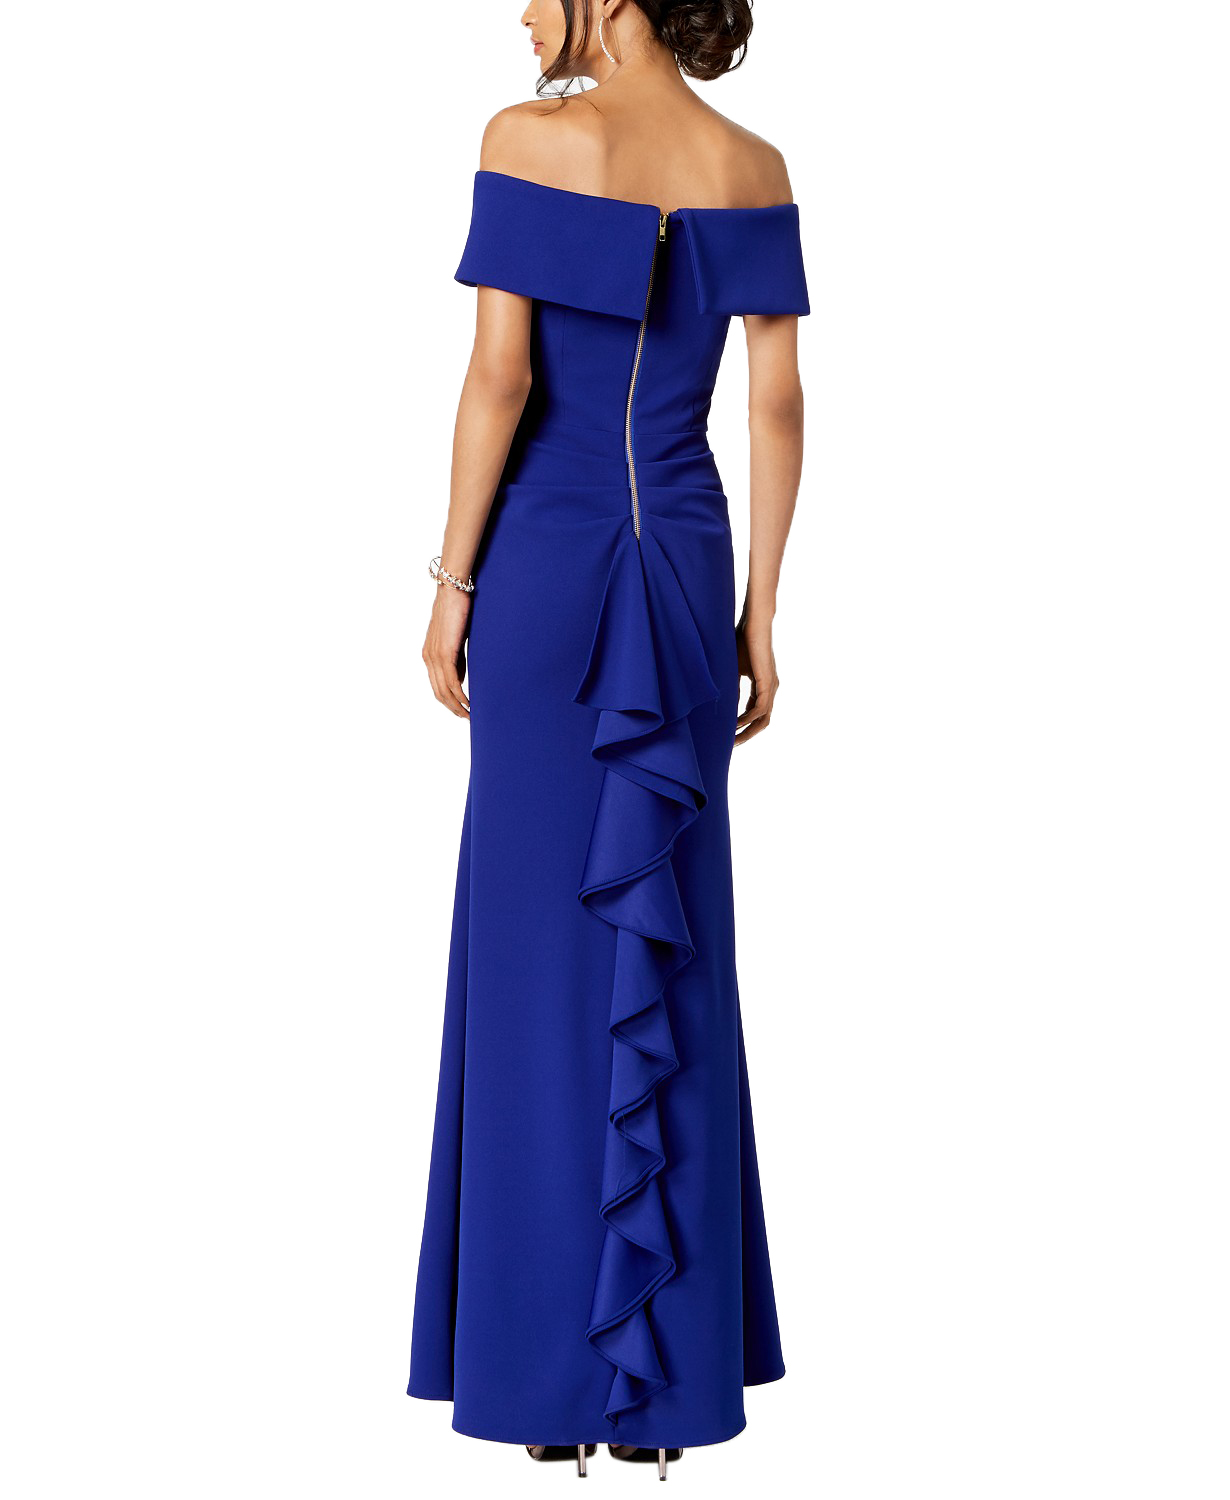 woocommerce-673321-2209615.cloudwaysapps.com-betsy-amp-adam-womens-blue-ruffled-back-off-the-shoulder-gown-dress